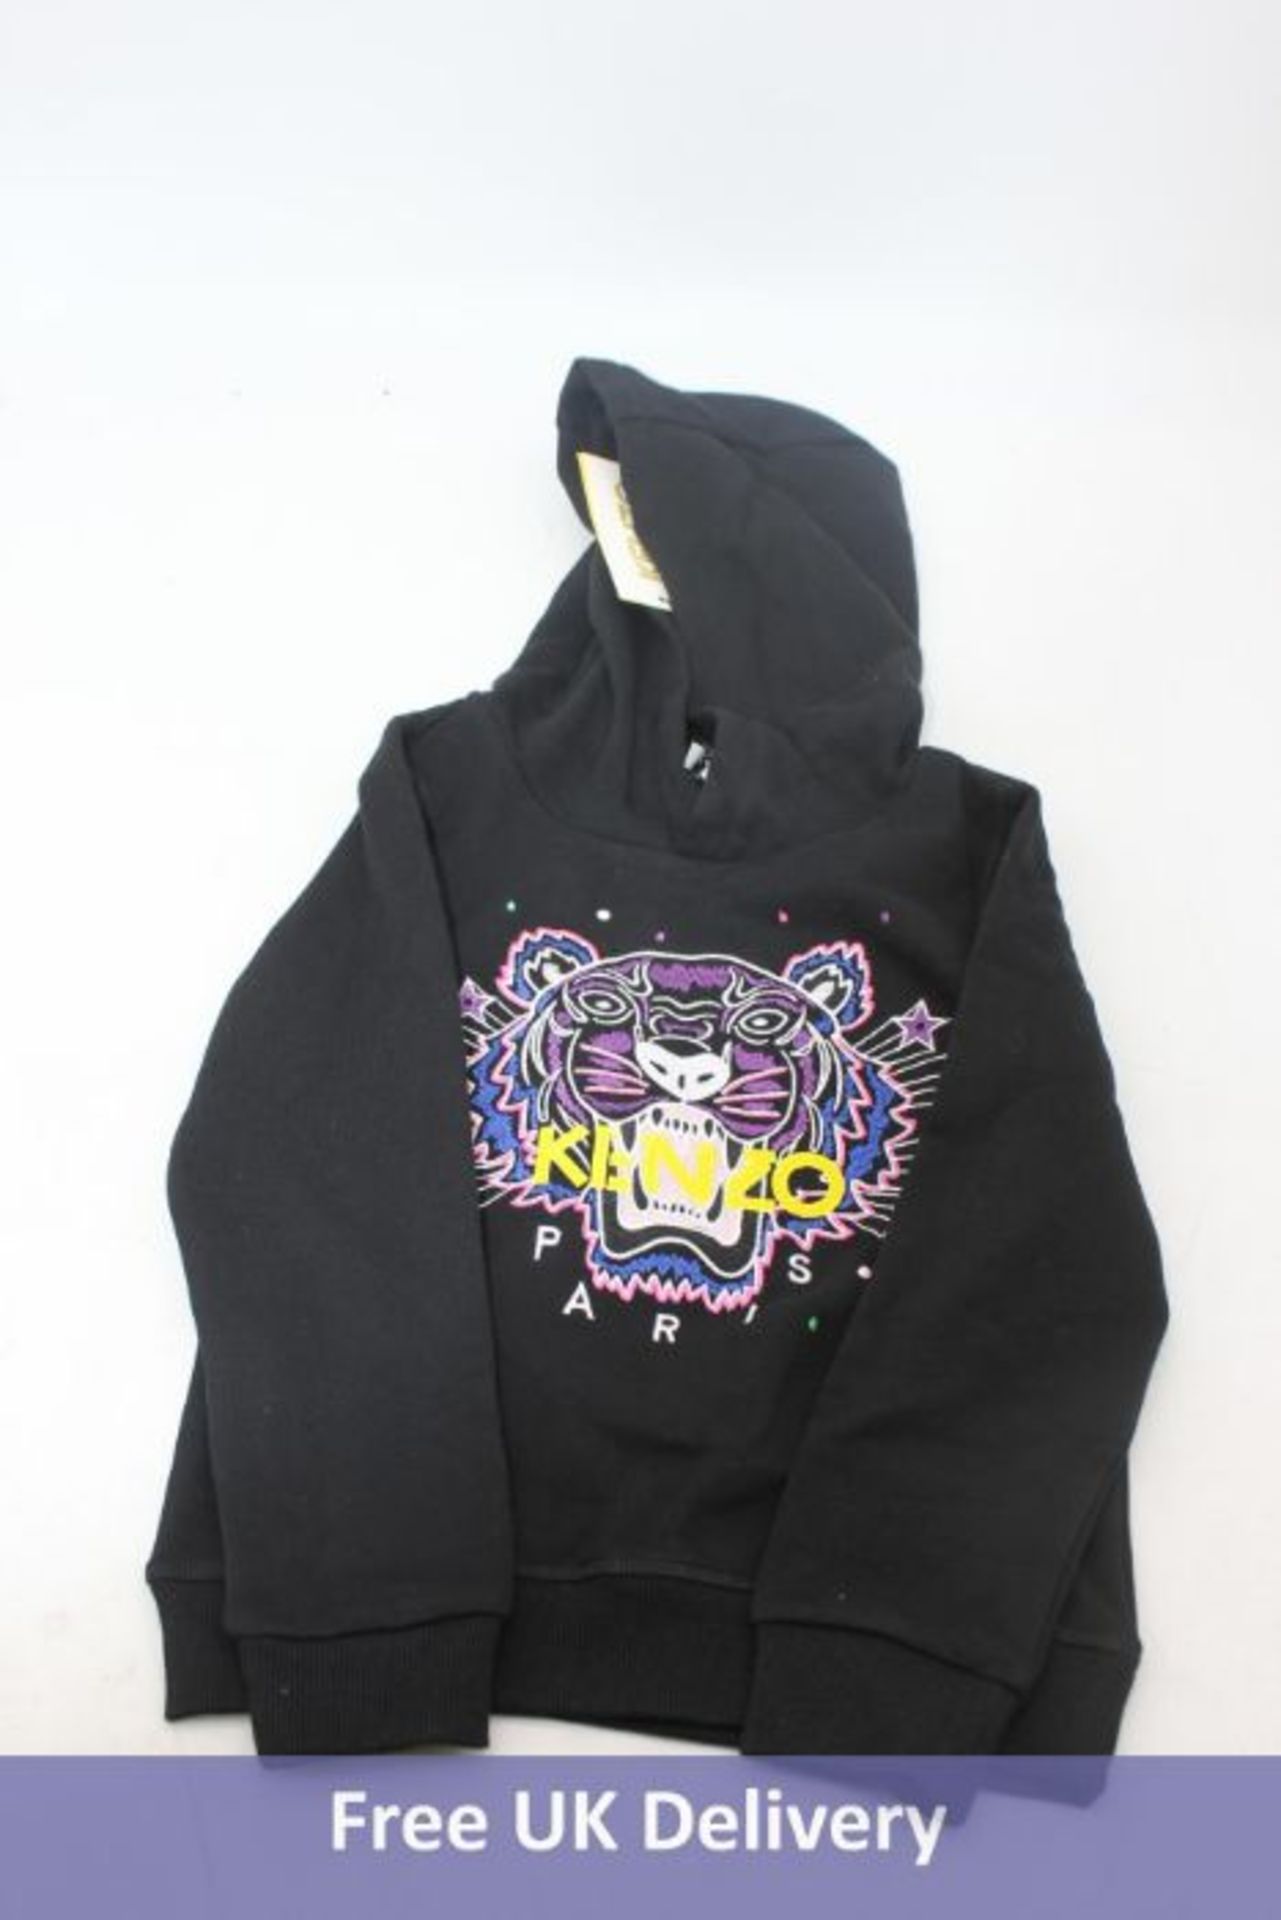 Kenzo Kids Tiger Hoodie Black, Size 8A, Brand New with Tag